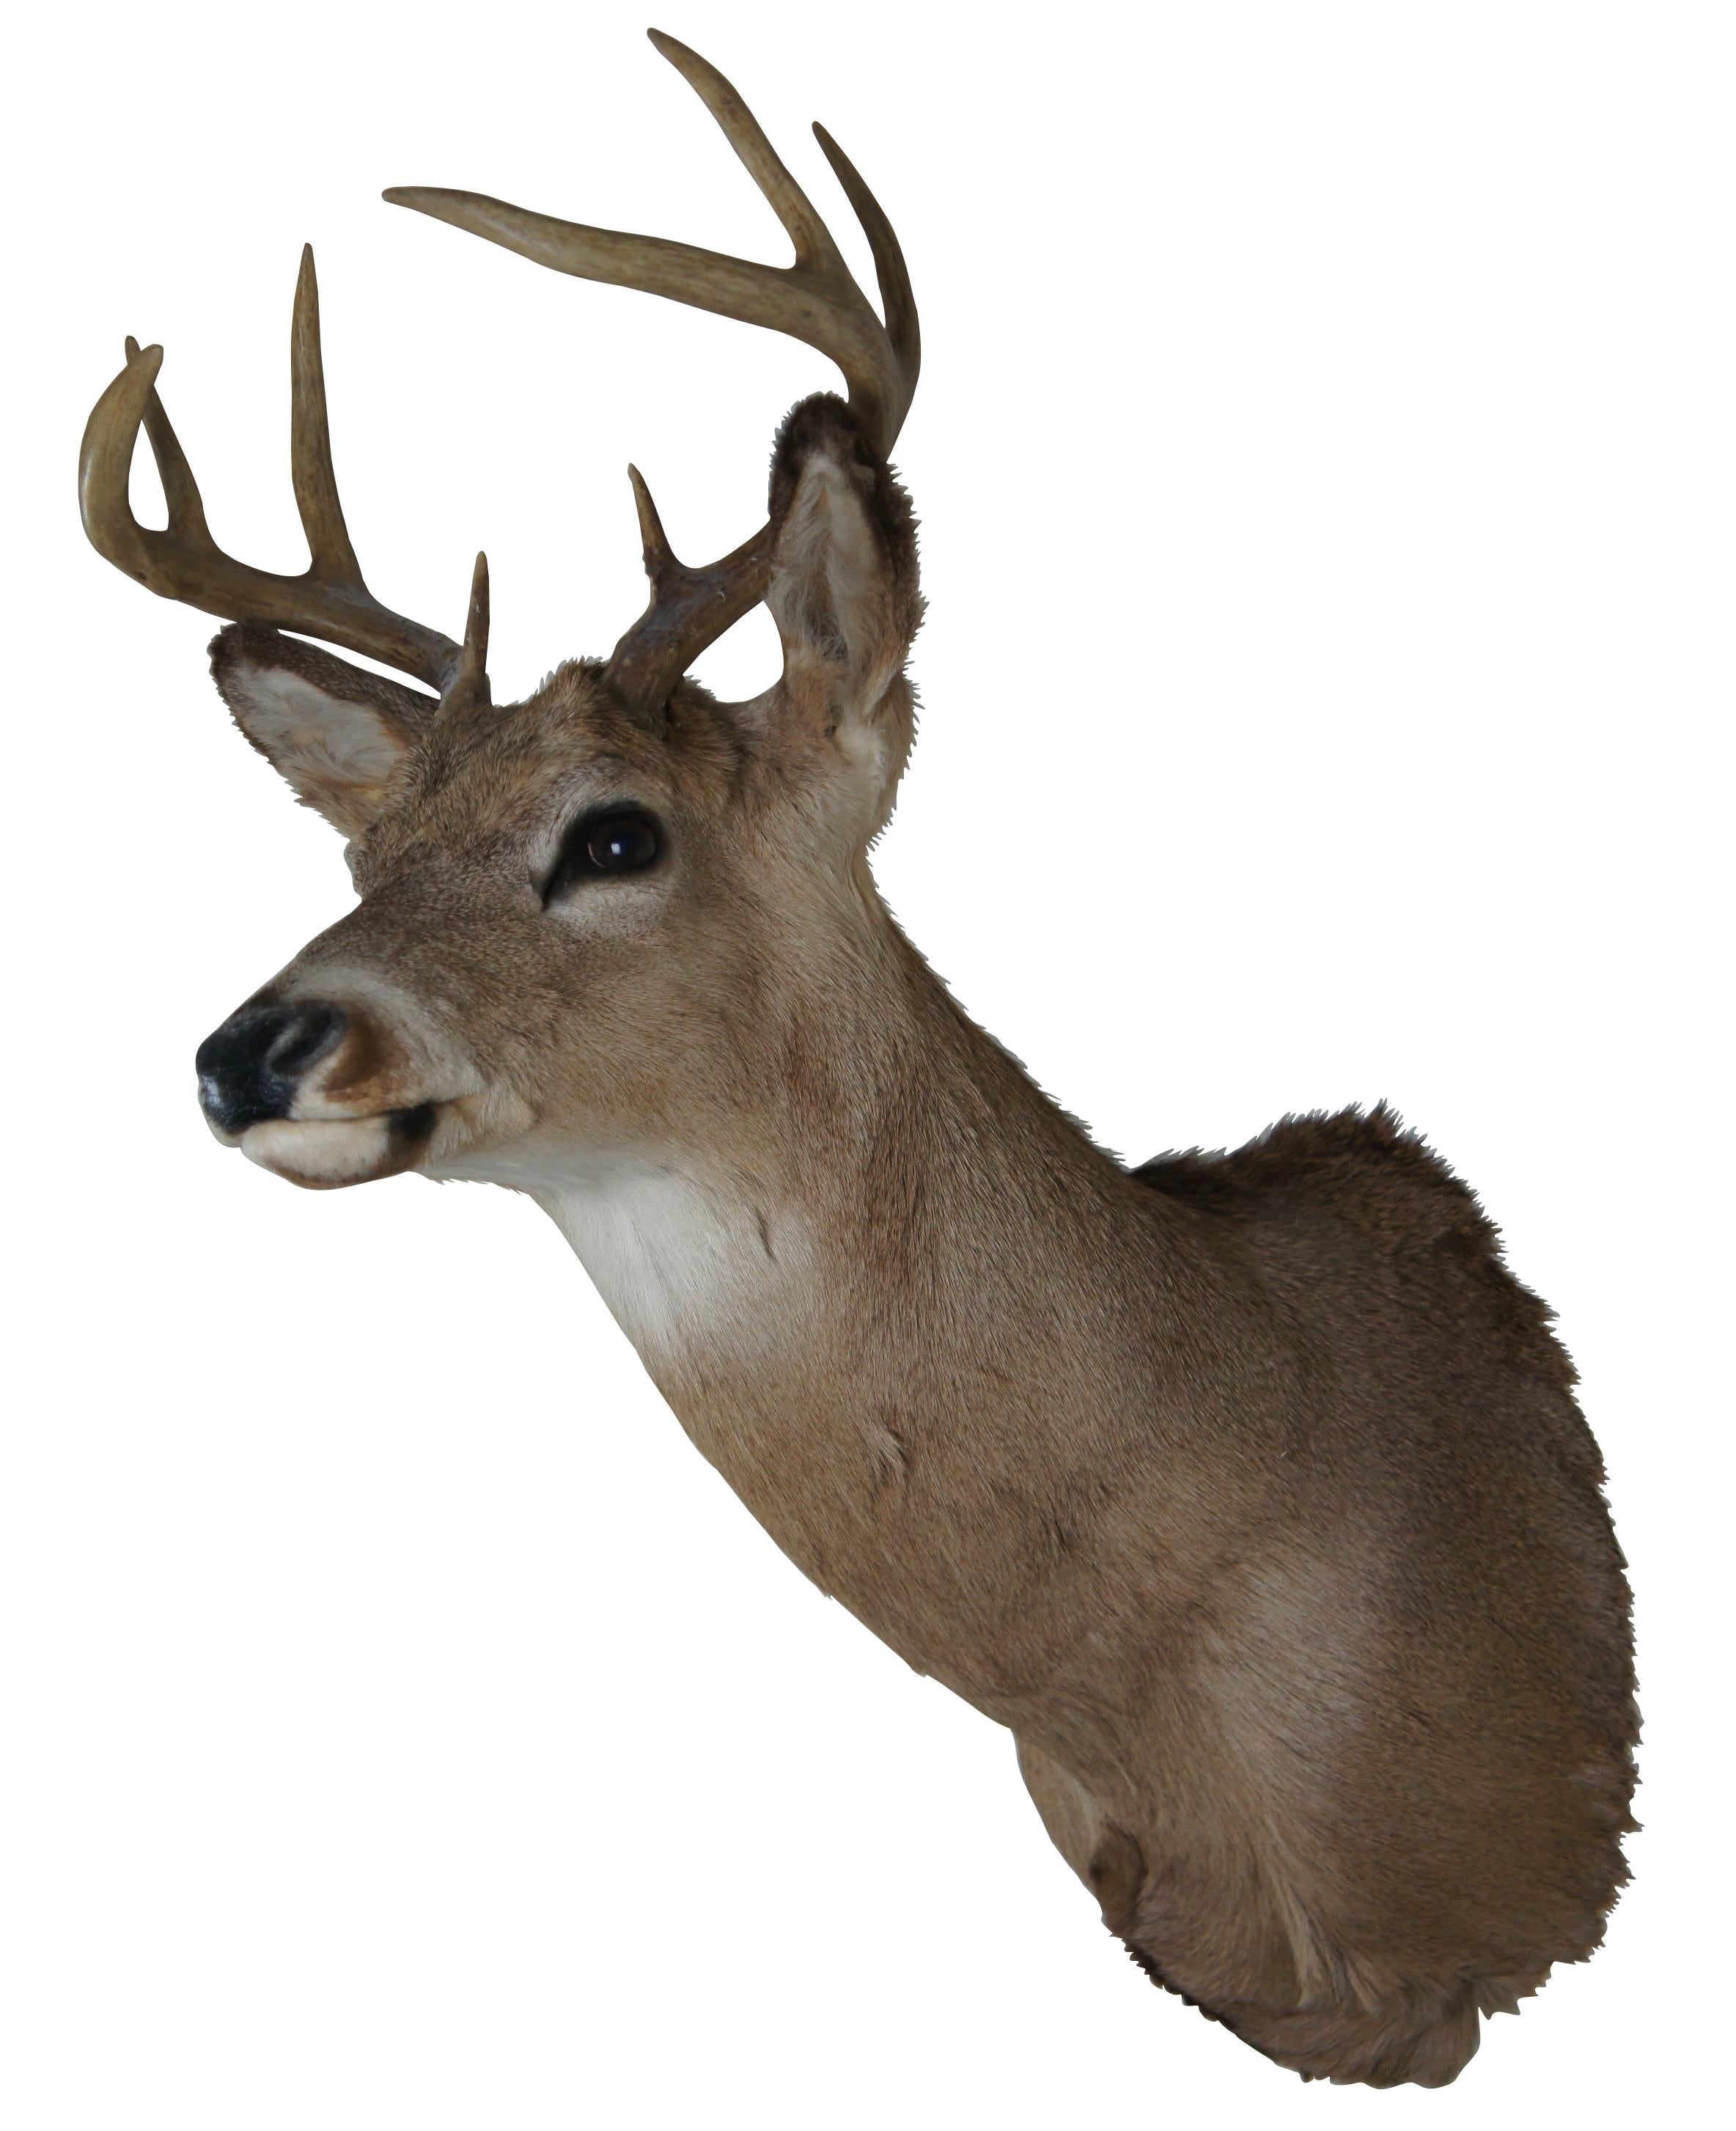 Vintage 8 point taxidermy deer head mount. Features eight point antlers and a nice coat. A well done piece of taxidermy in a nice pose and equally good condition. Mounted wood back, ready to be hung. Measure: 33